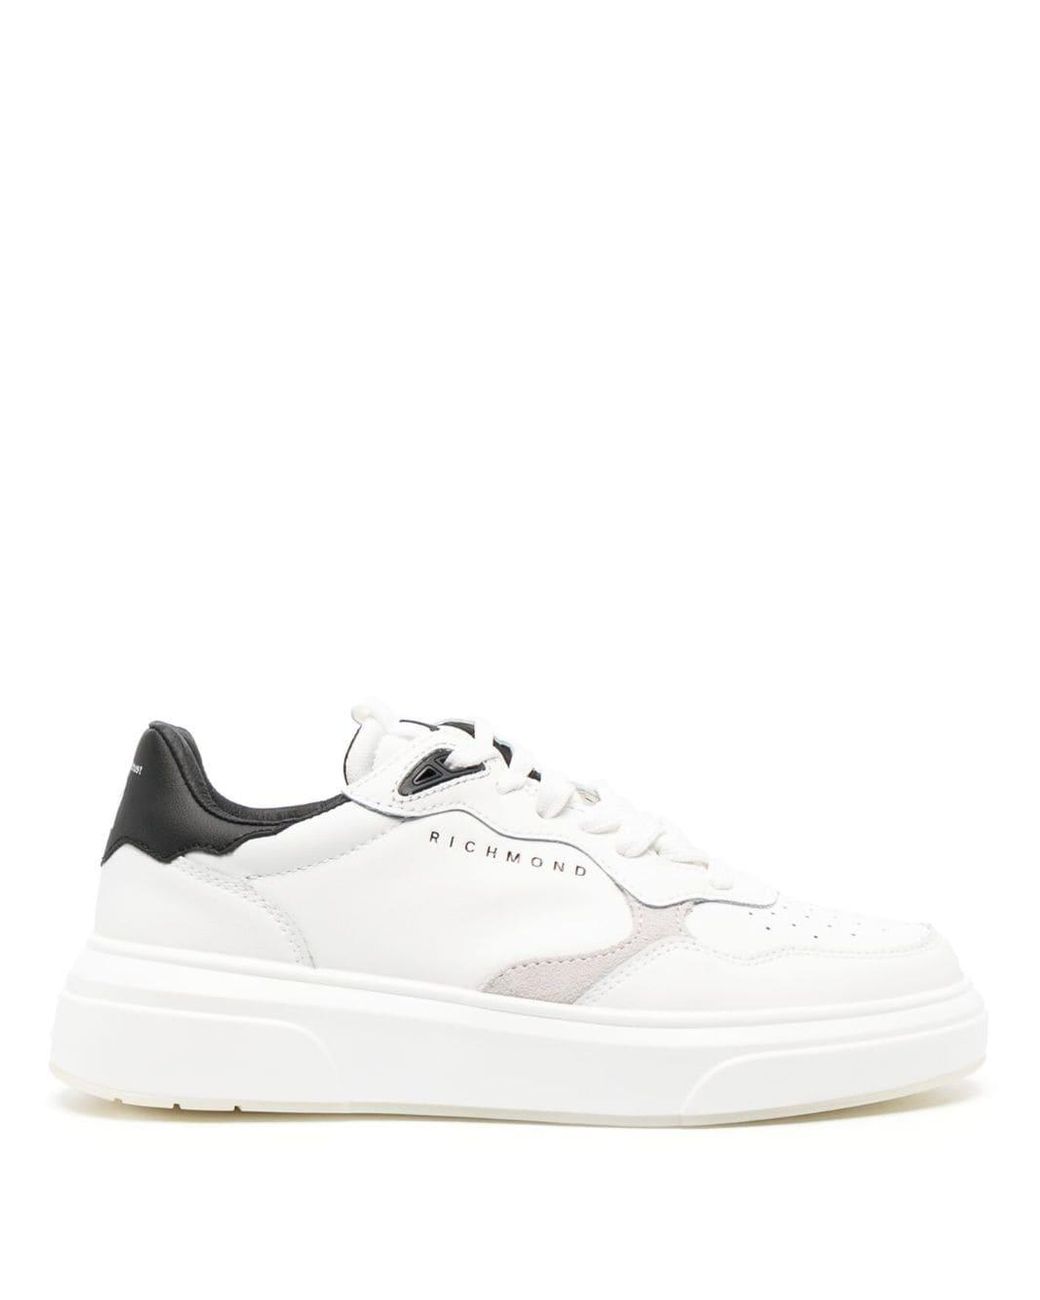 John Richmond Lace-up Low-top Sneakers in White | Lyst